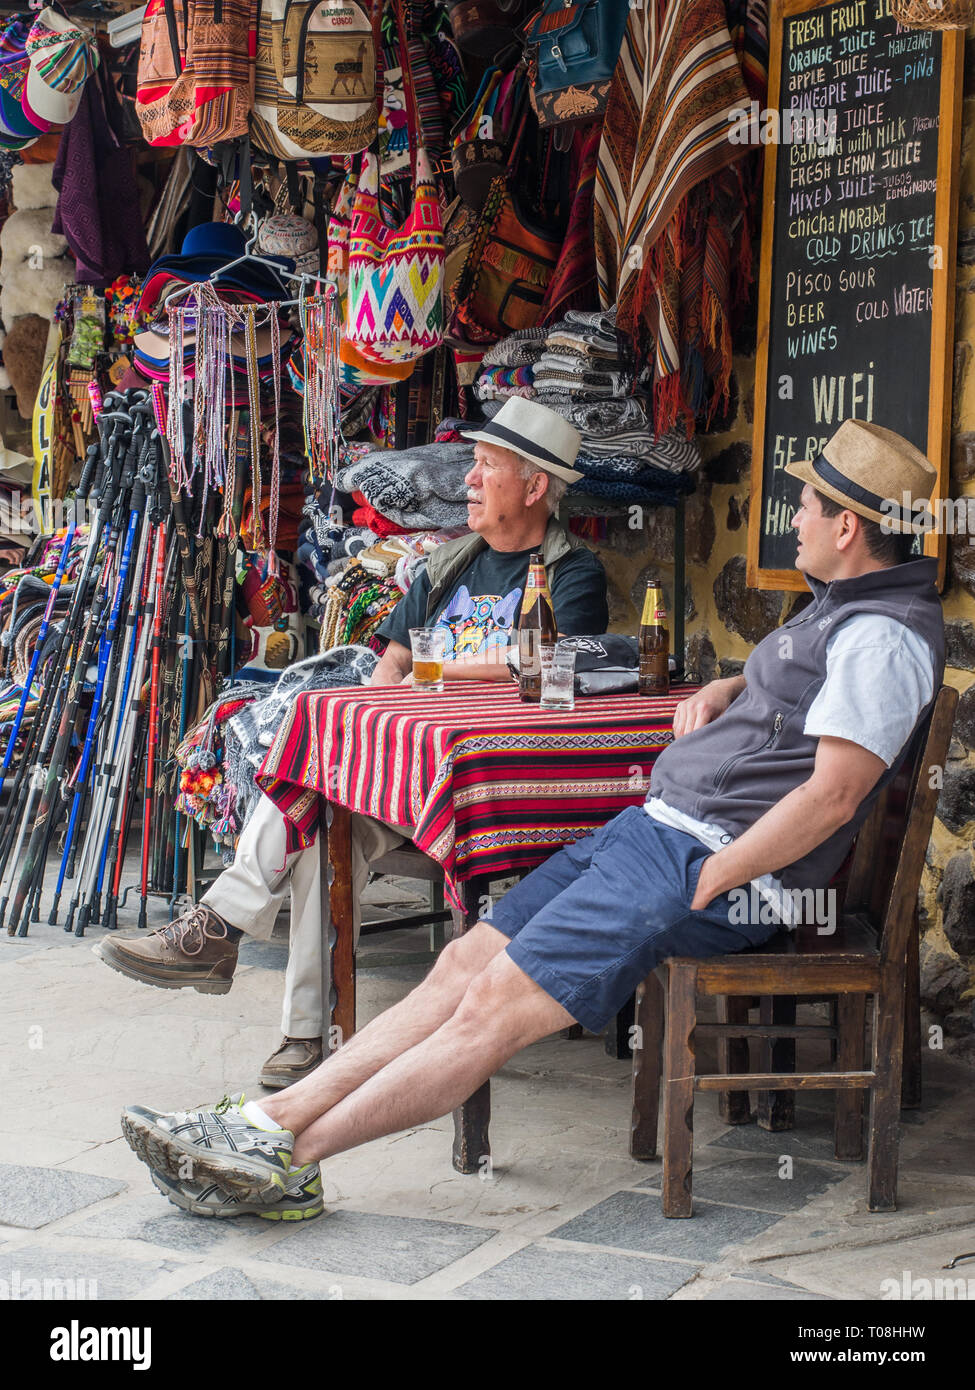 Ollantaytambo, Peru - May 20, 2016: Two men in the Panama hat siiting in trhe restaurant on the way to Machu Picchu. South America. Stock Photo